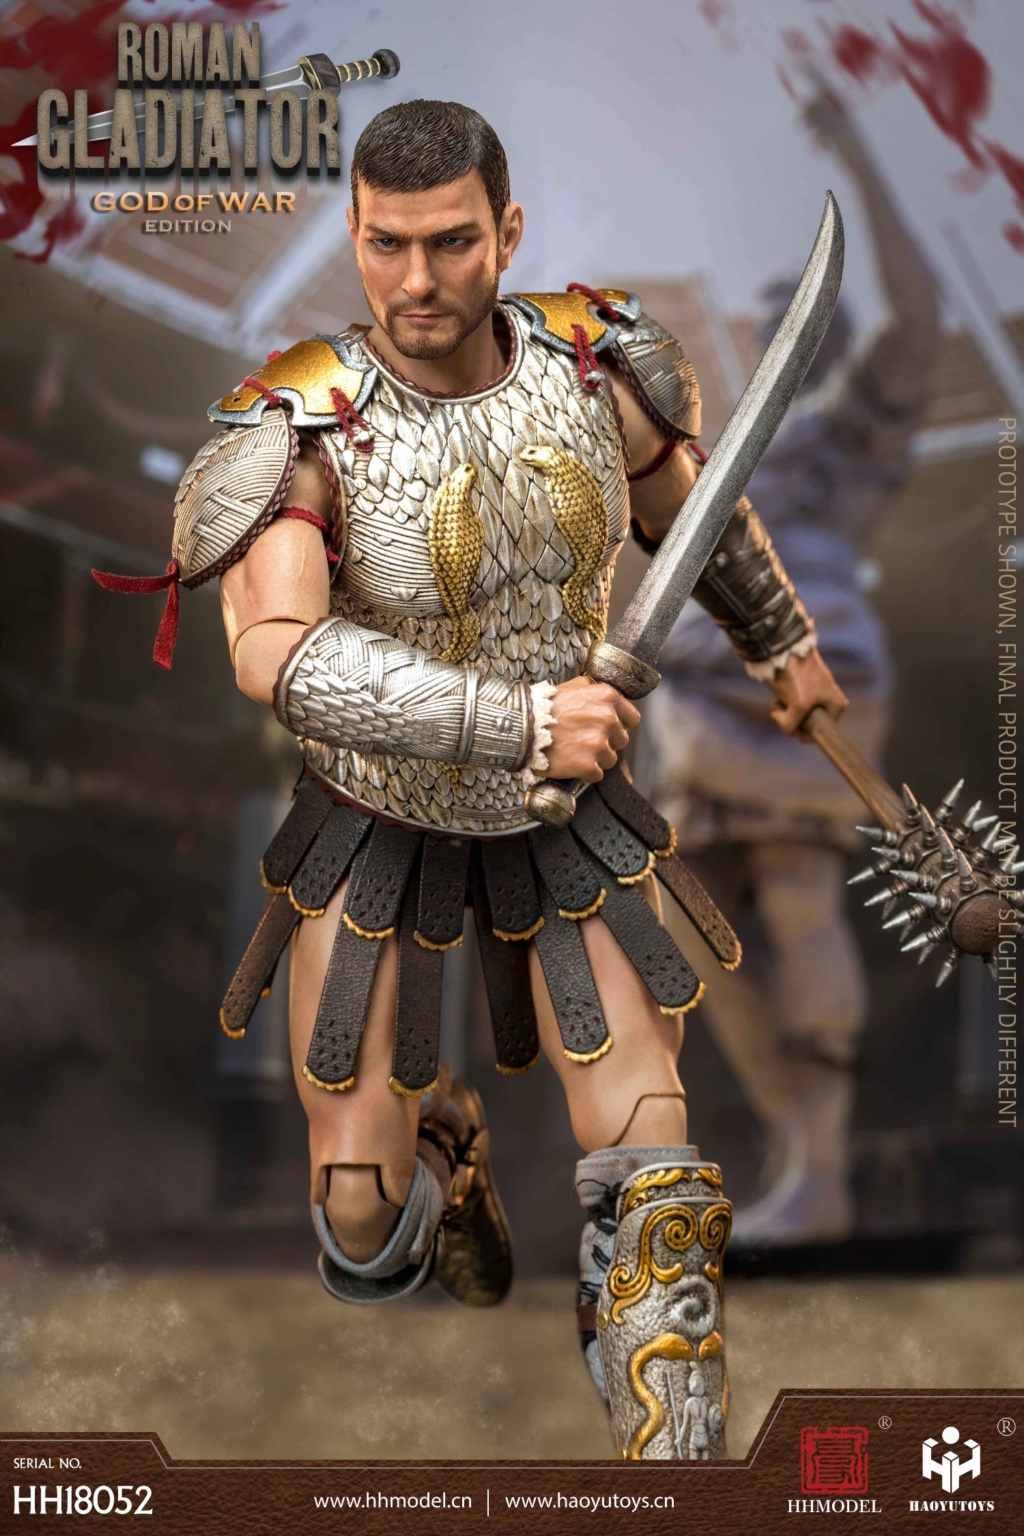 NEW PRODUCT: HHMODEL & HAOYUTOYS: 1/6 Imperial Legion Series - Roman Gladiator [God of War Edition] HH18052 & [Hunt Edition] HH18053 20384511